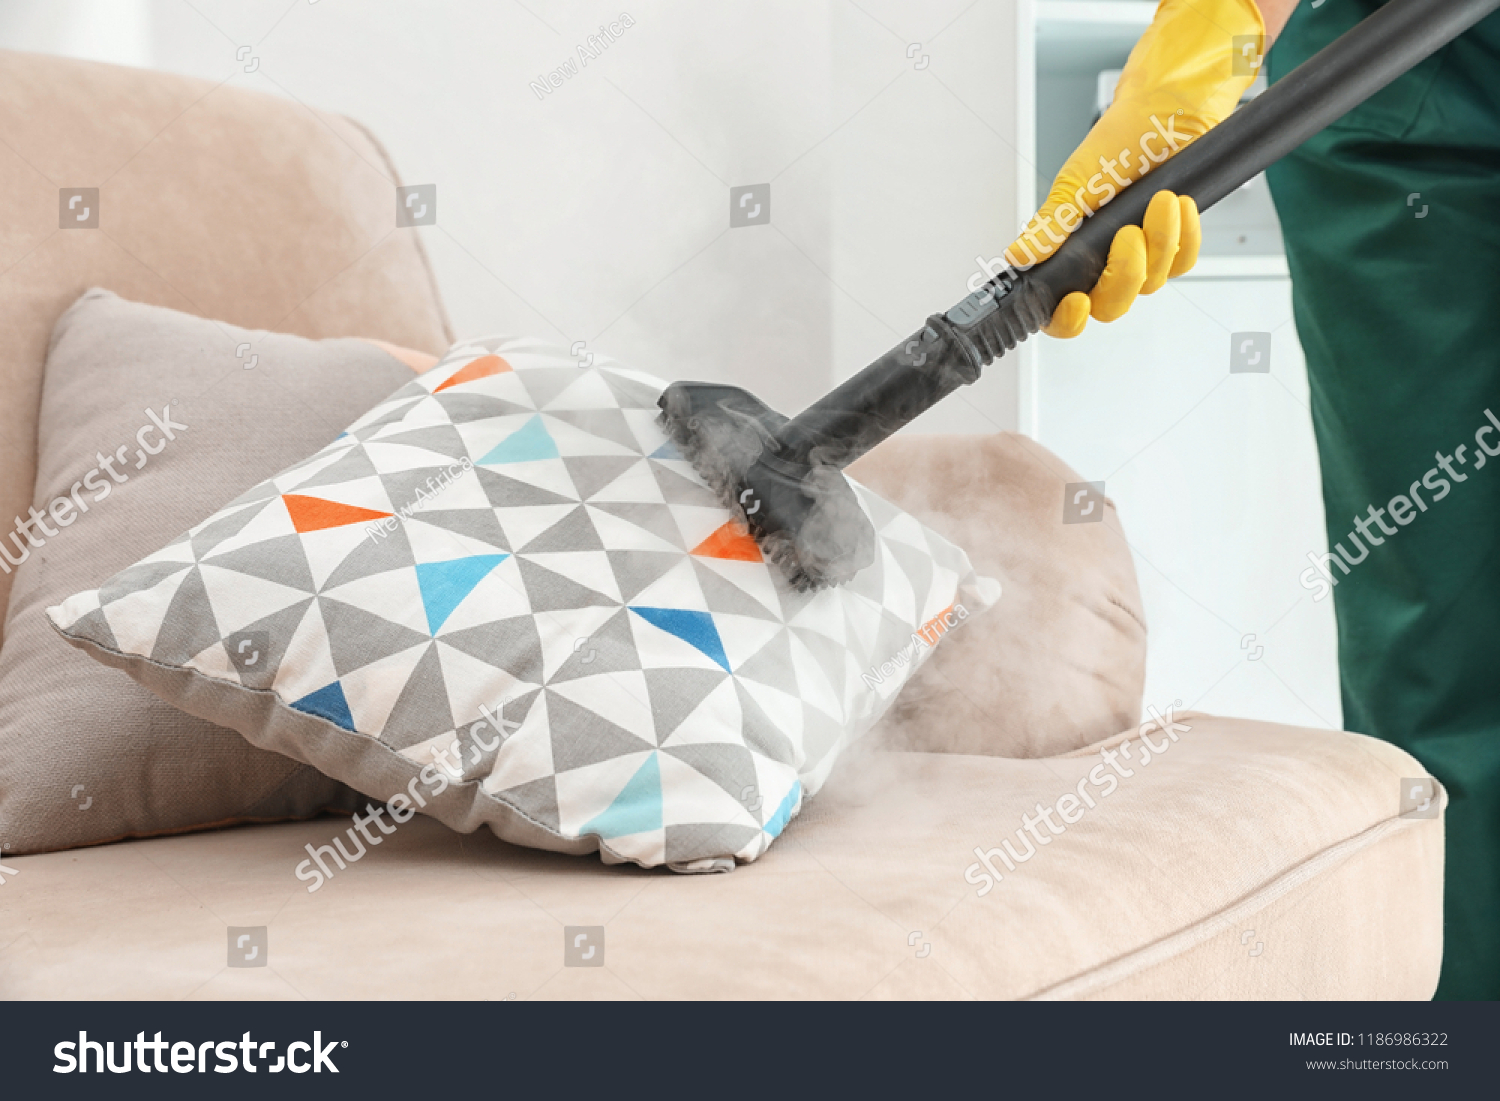 Janitor removing dirt from sofa cushion with steam cleaner, closeup #1186986322